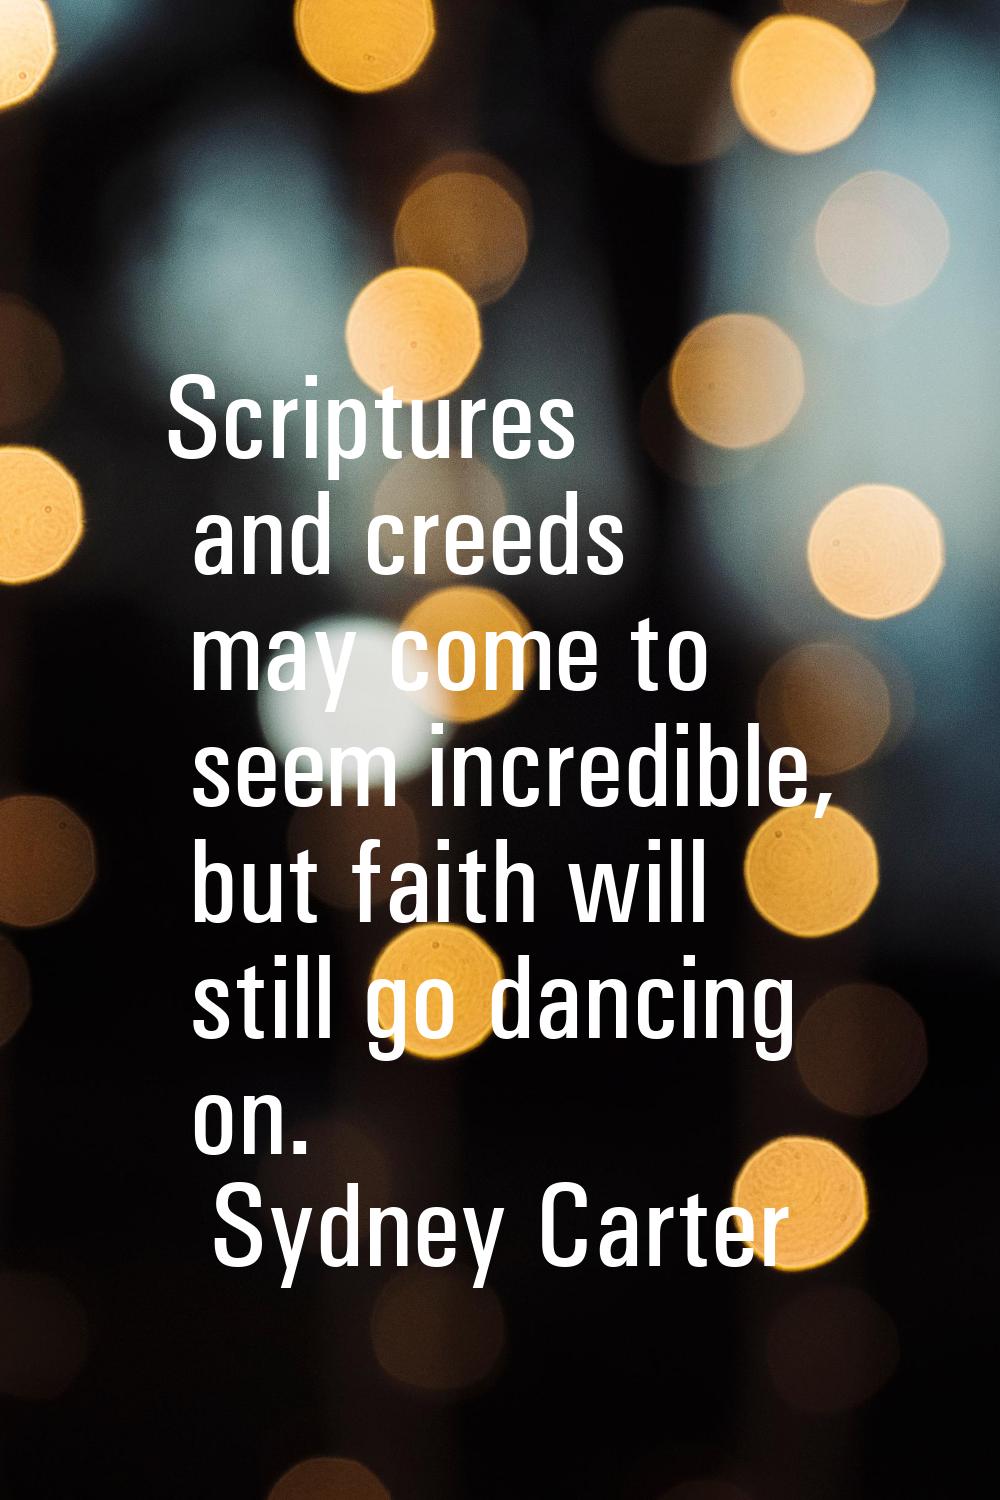 Scriptures and creeds may come to seem incredible, but faith will still go dancing on.